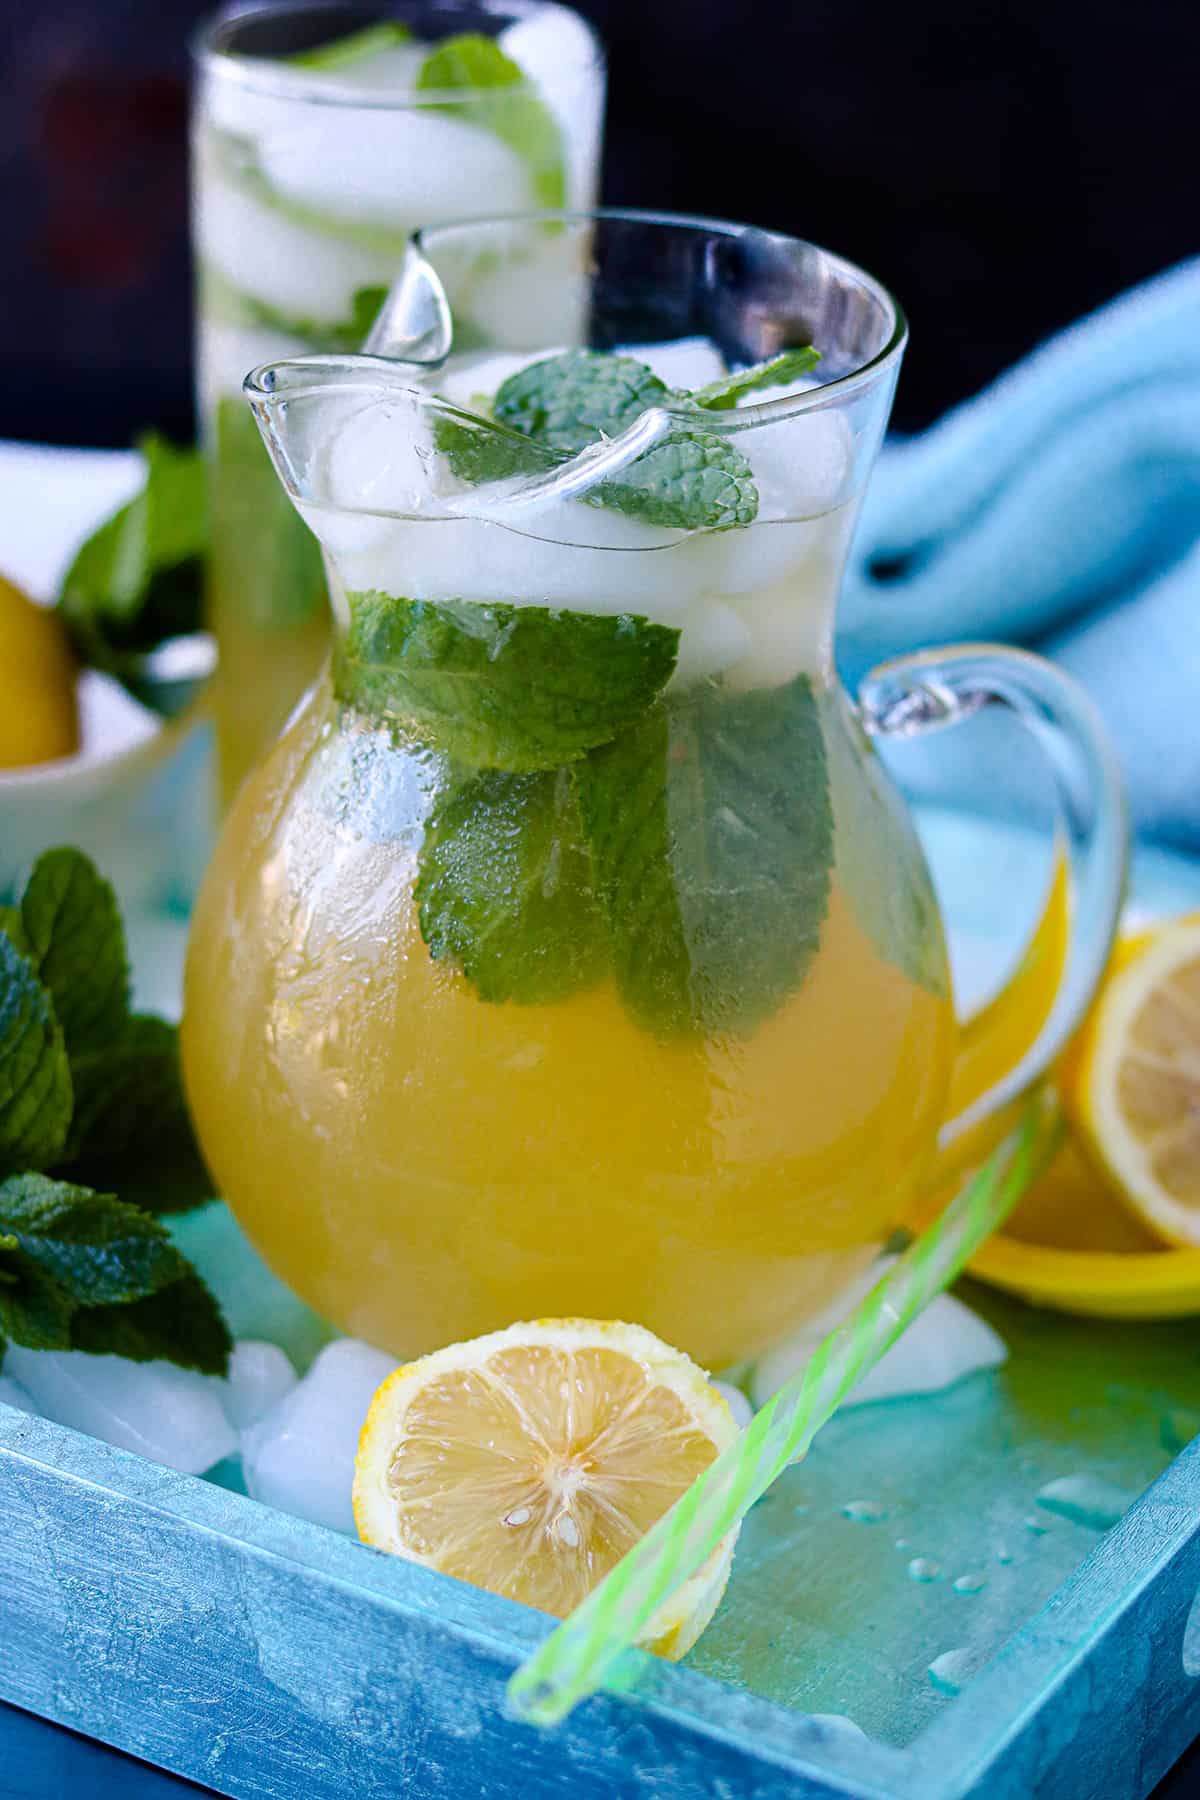 Haitian Jus Citron In glass pitcher with mint and lemon halves